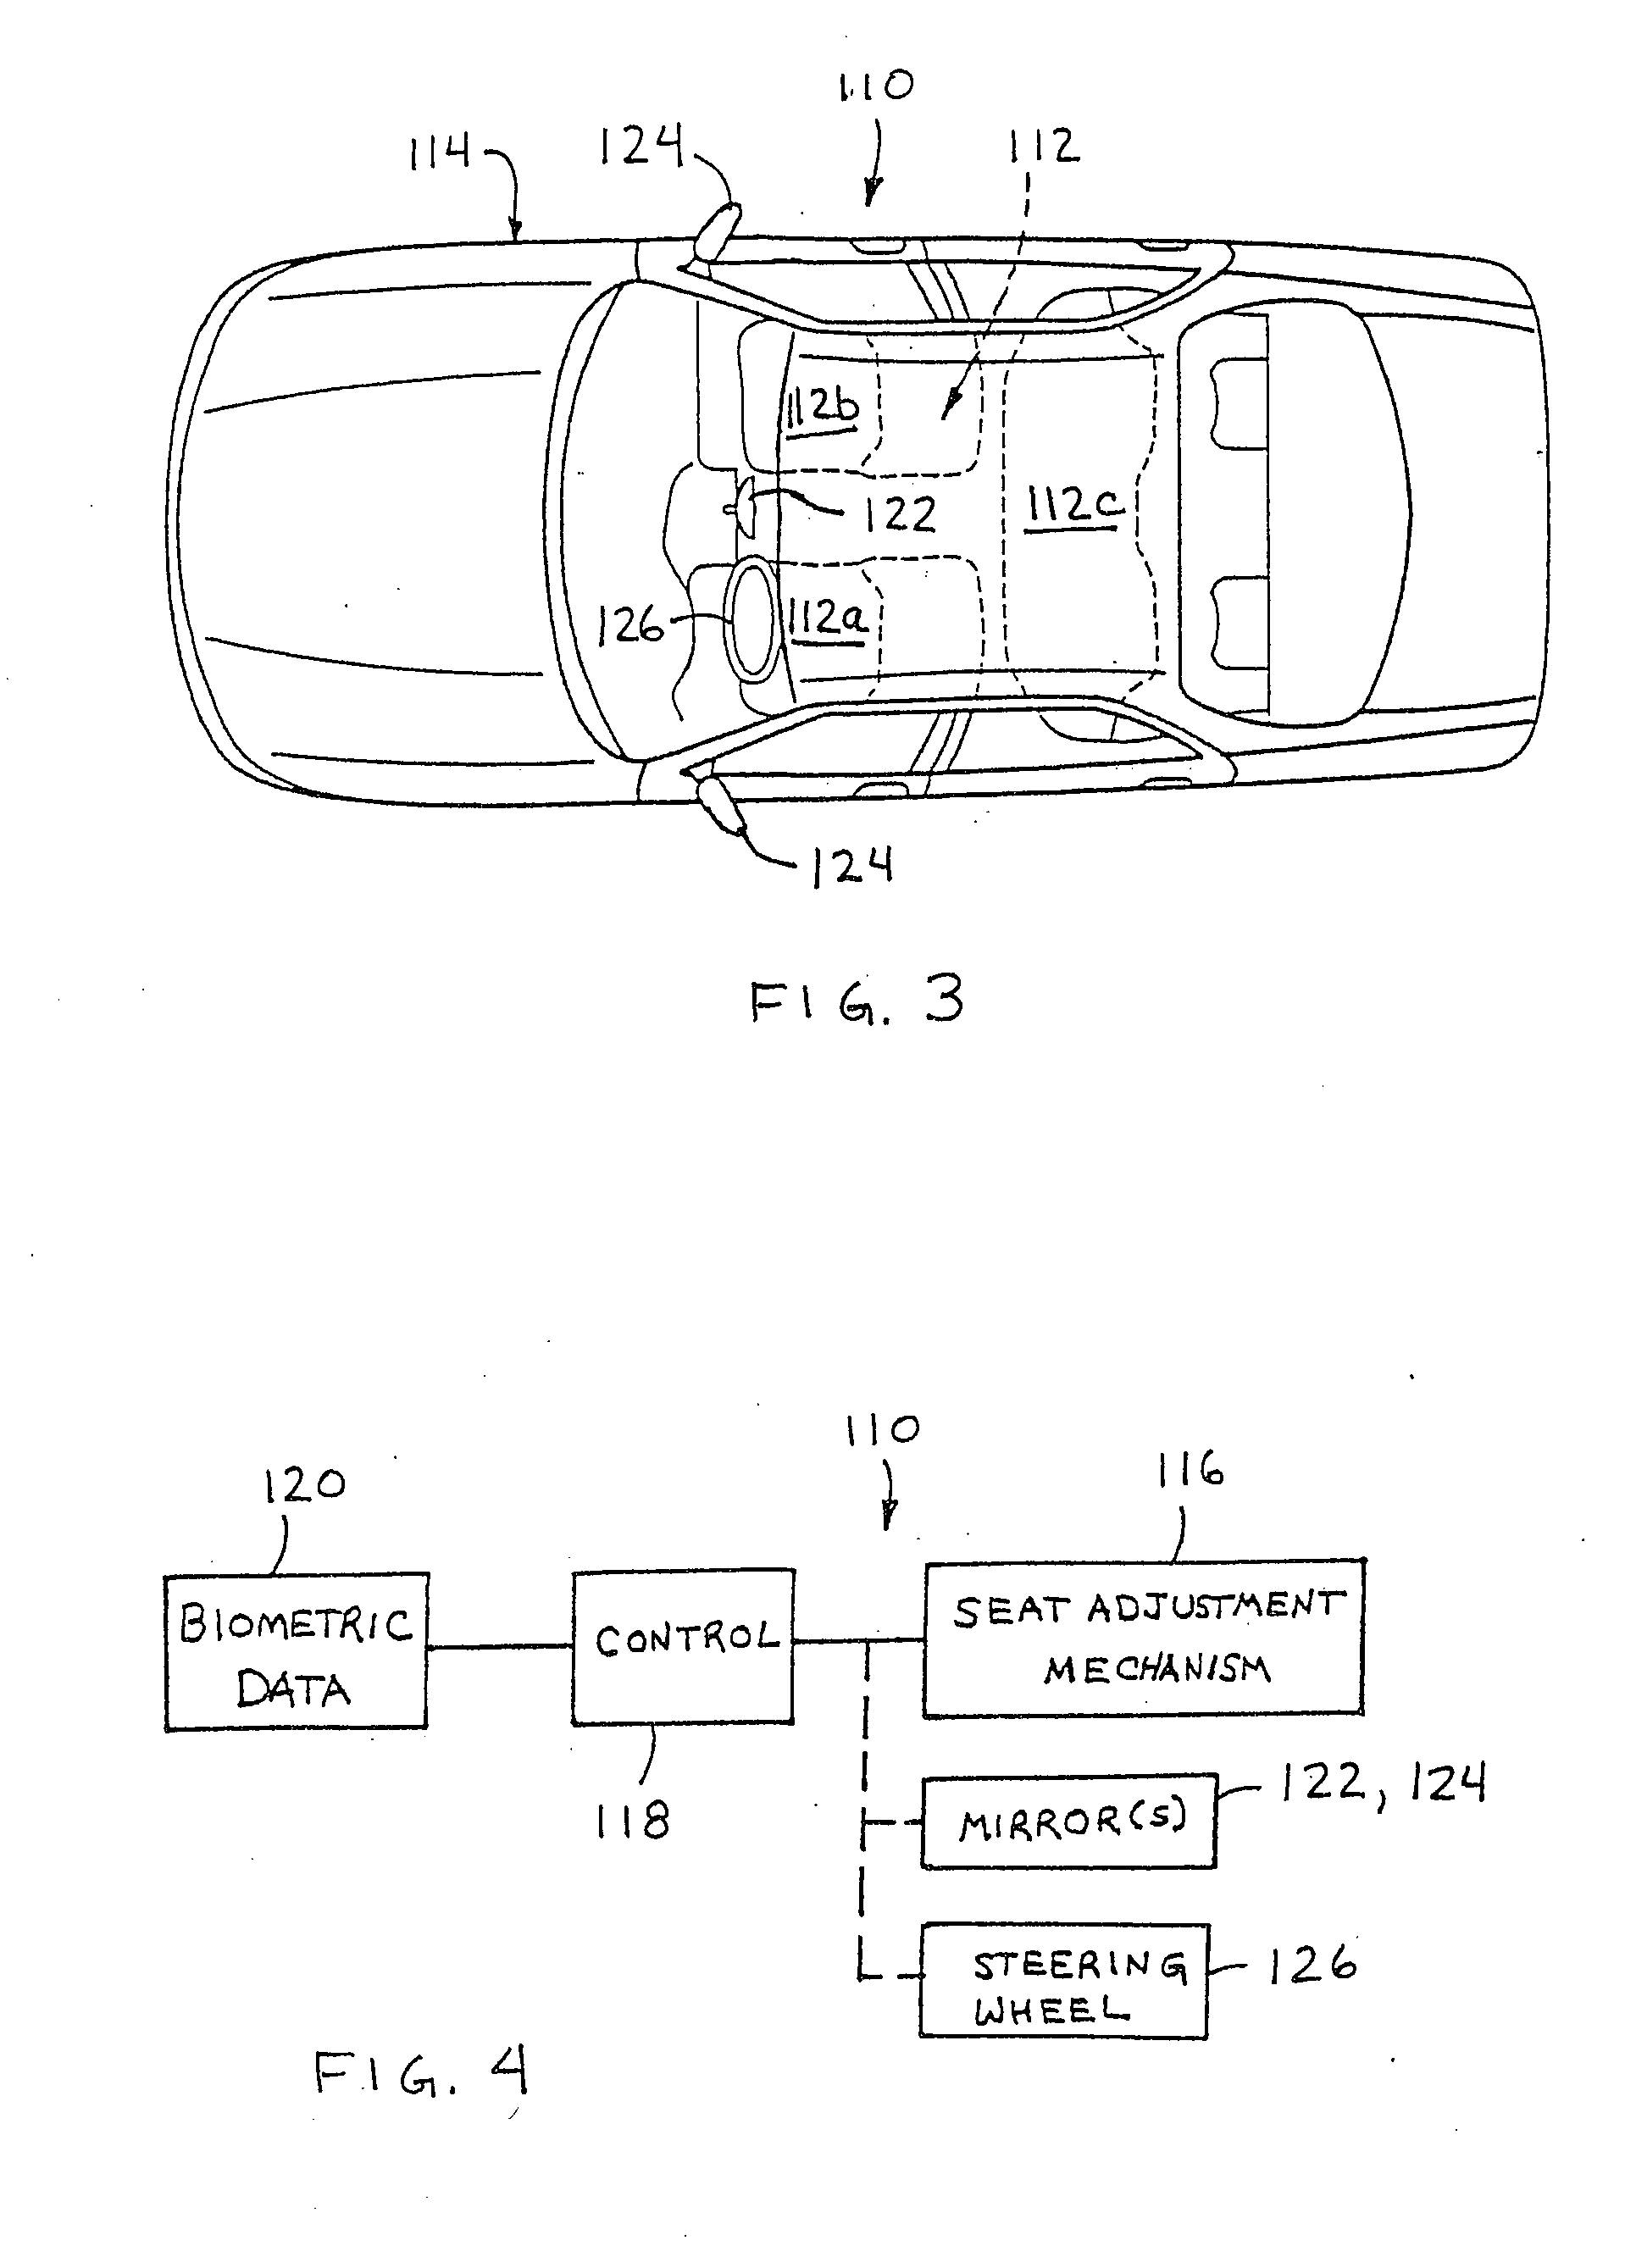 Navigational mirror system for a vehicle